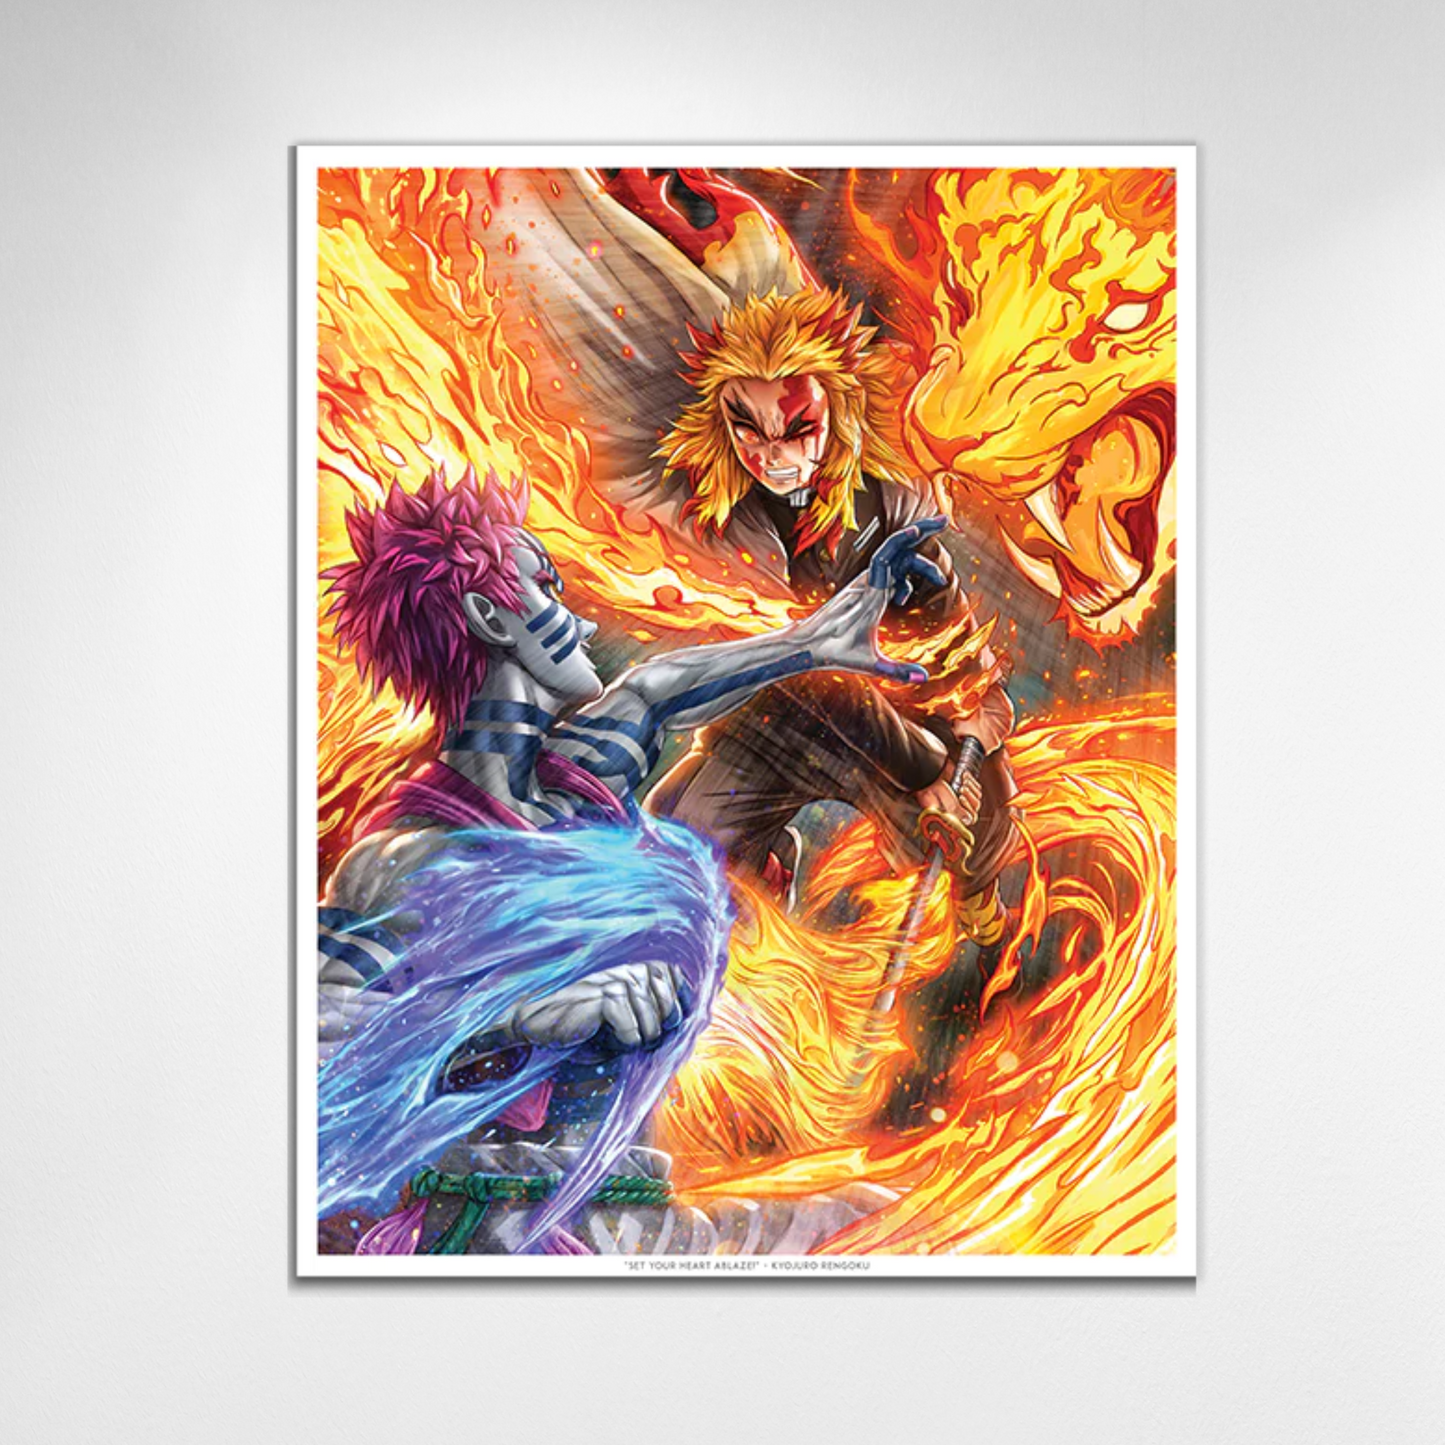 Allies and Enemies (Dragon Ball Super) Group Fabric Wall Scroll